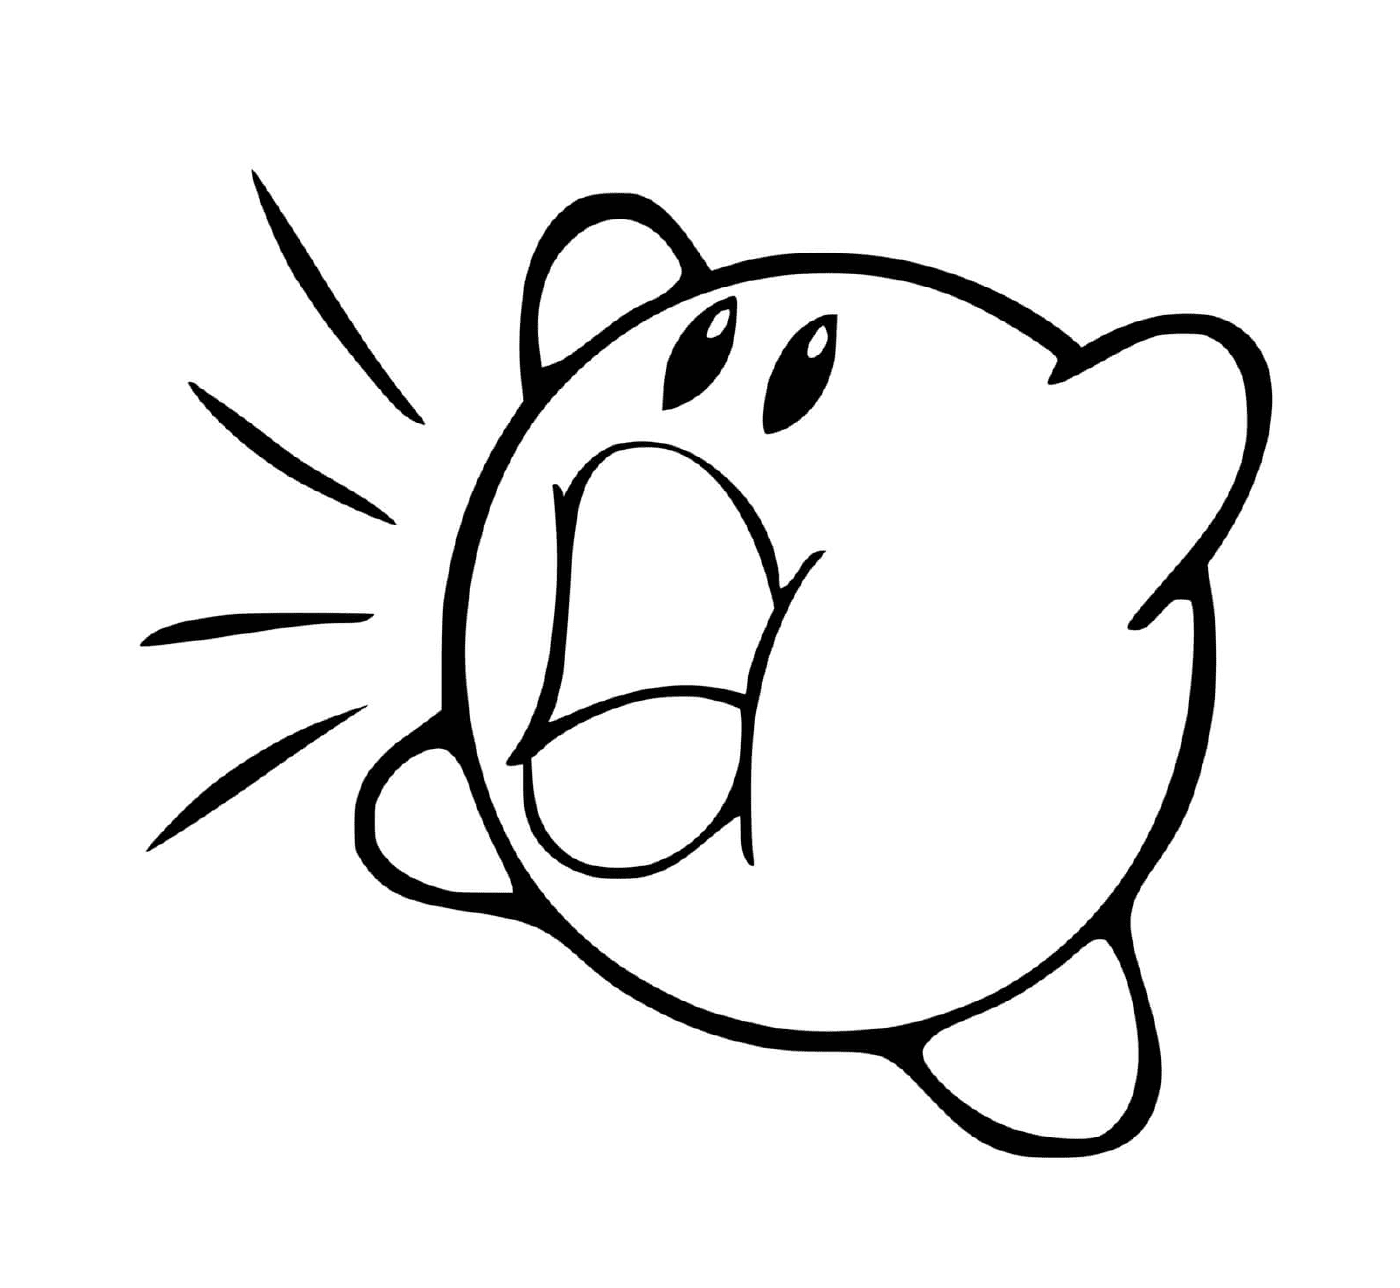  Kirby swallows everything in his way 